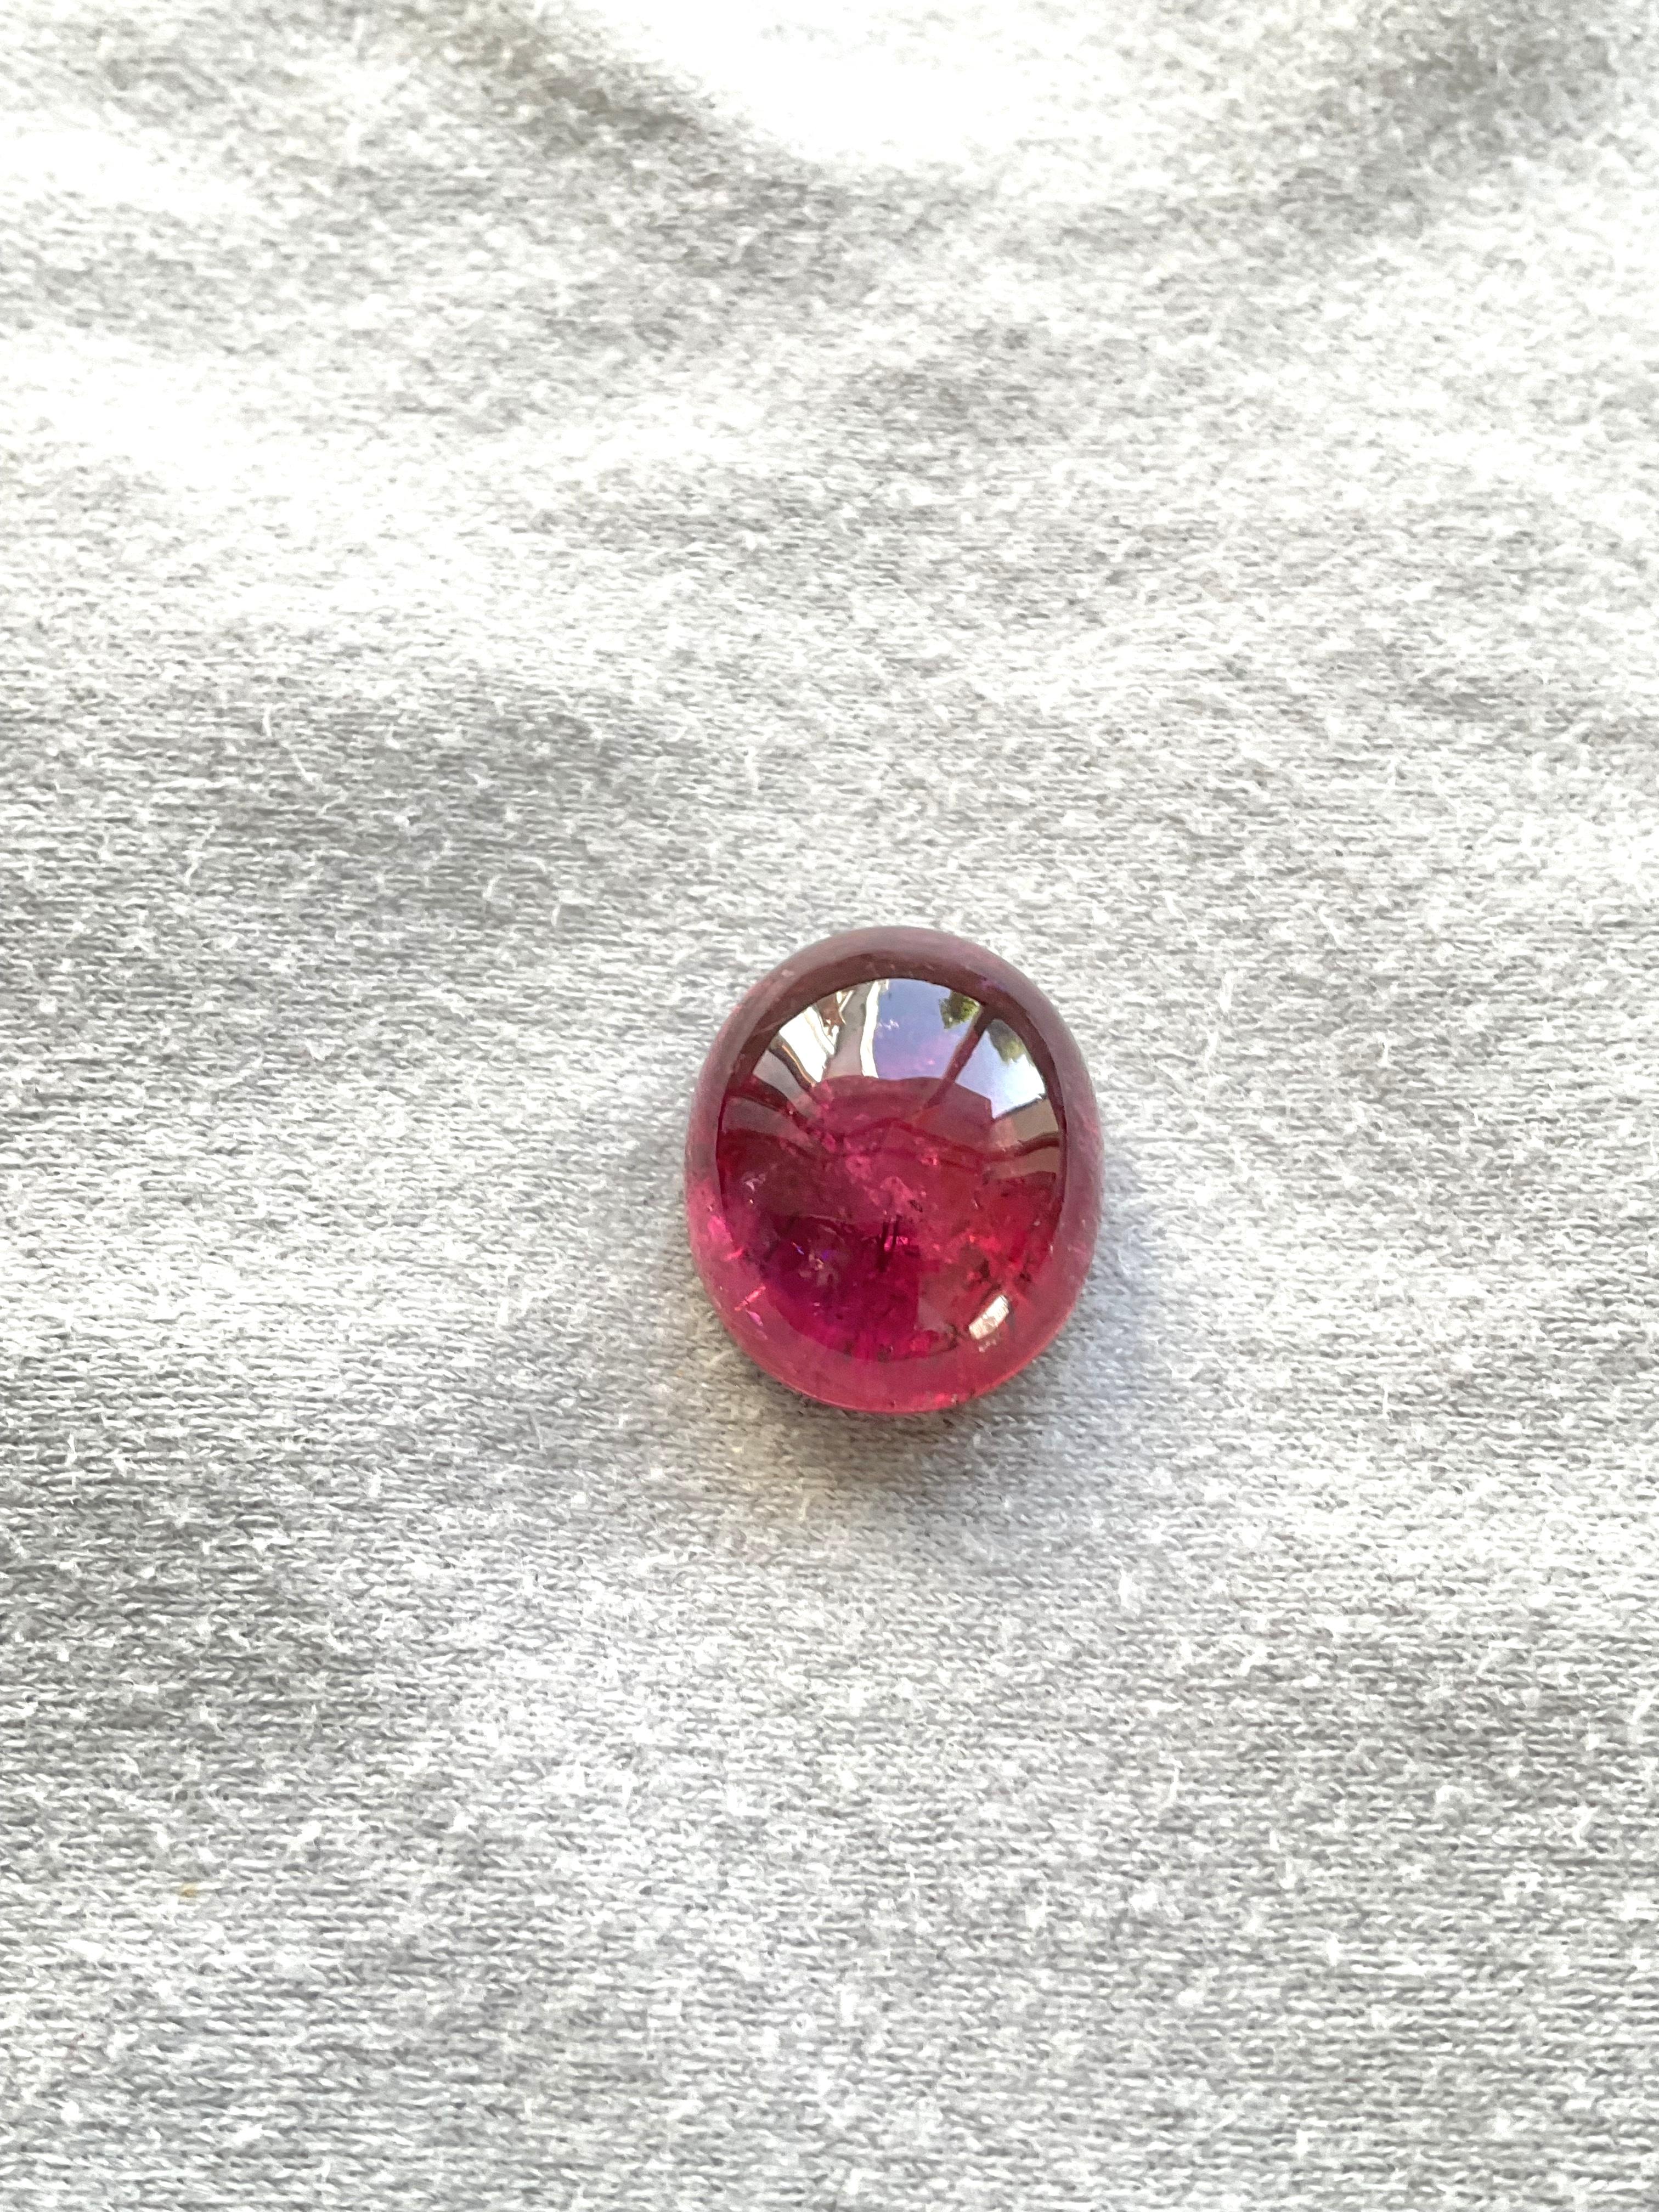 24.09 Carats Top Quality Rubellite Tourmaline Cabochon Natural Gemstone For Sale 1